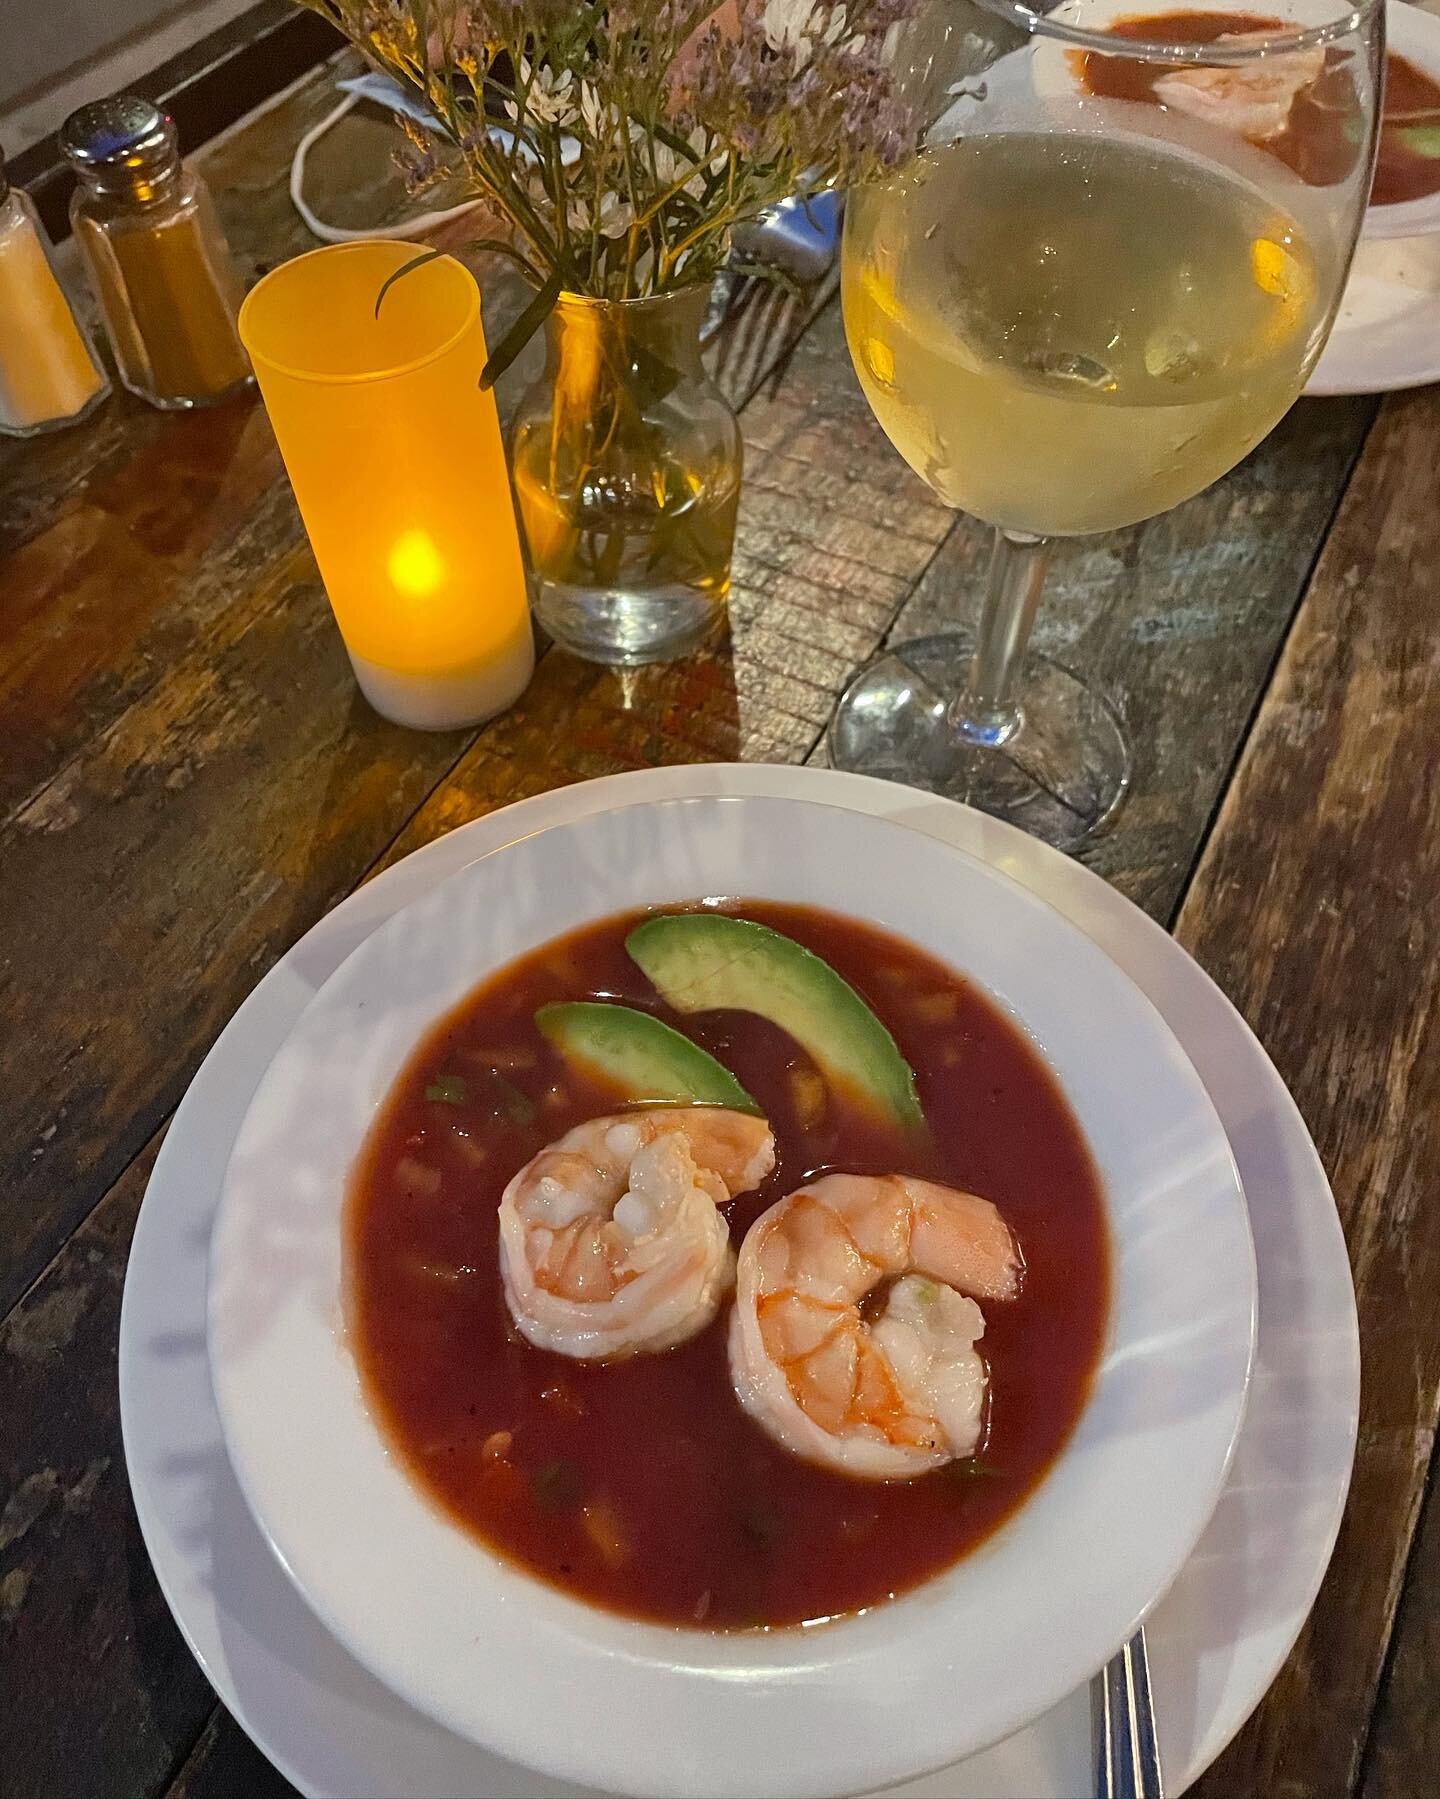 Try our chilled #gazpacho #avocado #shrimp soup @busstopcafenyc #WhereHudsonMeetsBethune
.
.
#summer #coldsoup #coldsoupseason #beautifulnight  #yummy  #delicious #food #foodporn #food52 #foodstagram #restaurant #localbusiness #supportlocal #eatlocal